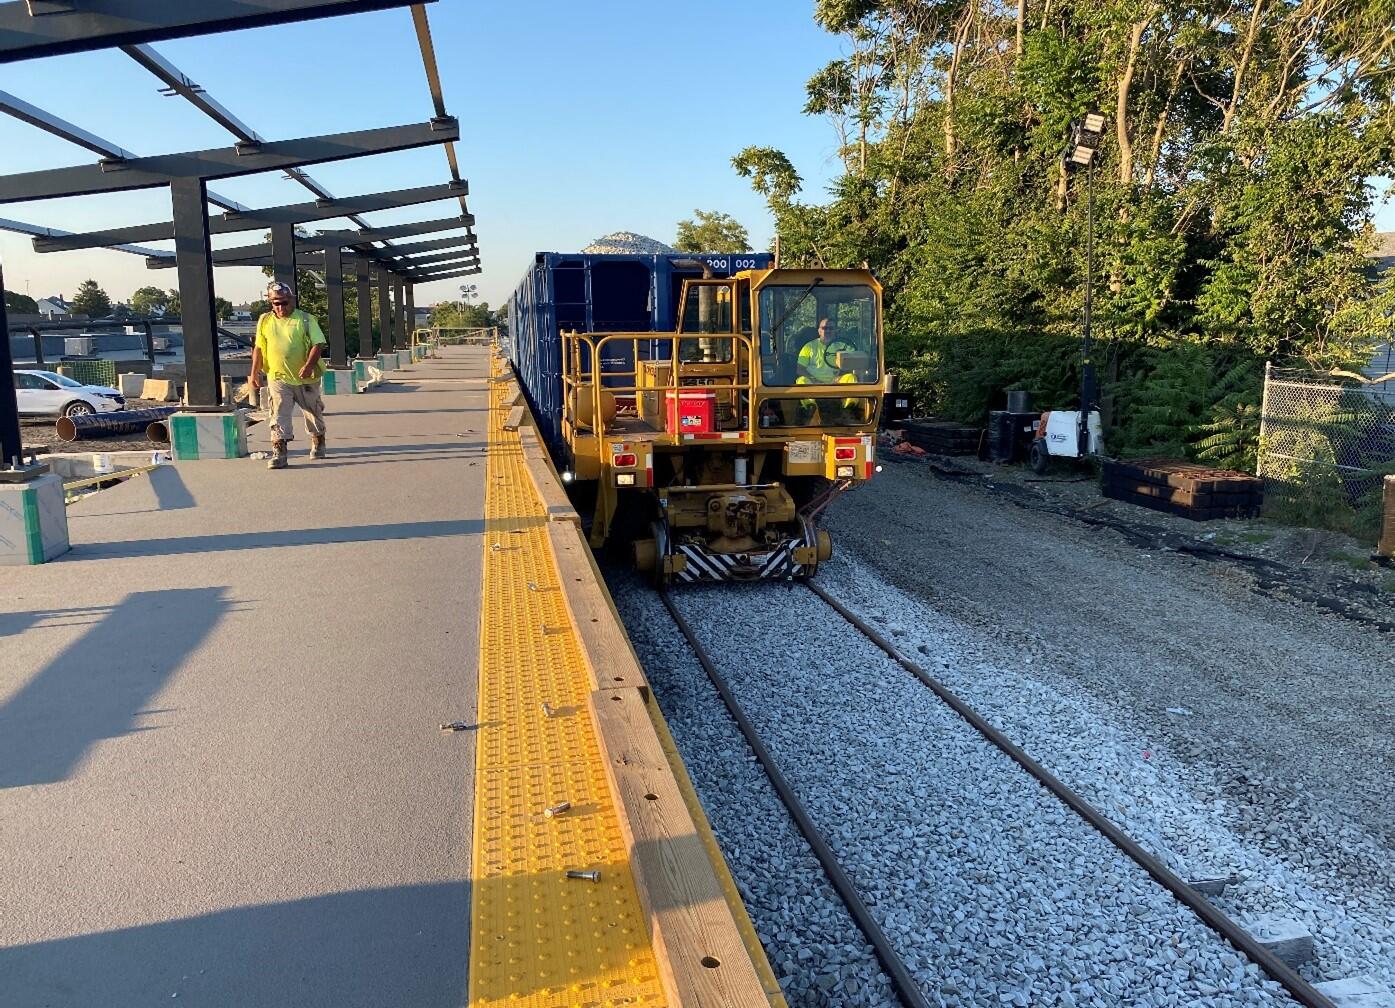 A construction worker drives a ballast spreader over the tracks at Fall River Station. Ballast are small rocks that serve as a bed for rail tracks and provide drainage and strength for heavy loads carried by trains. A second construction worker walks on the station platform alongside the ballast spreader.